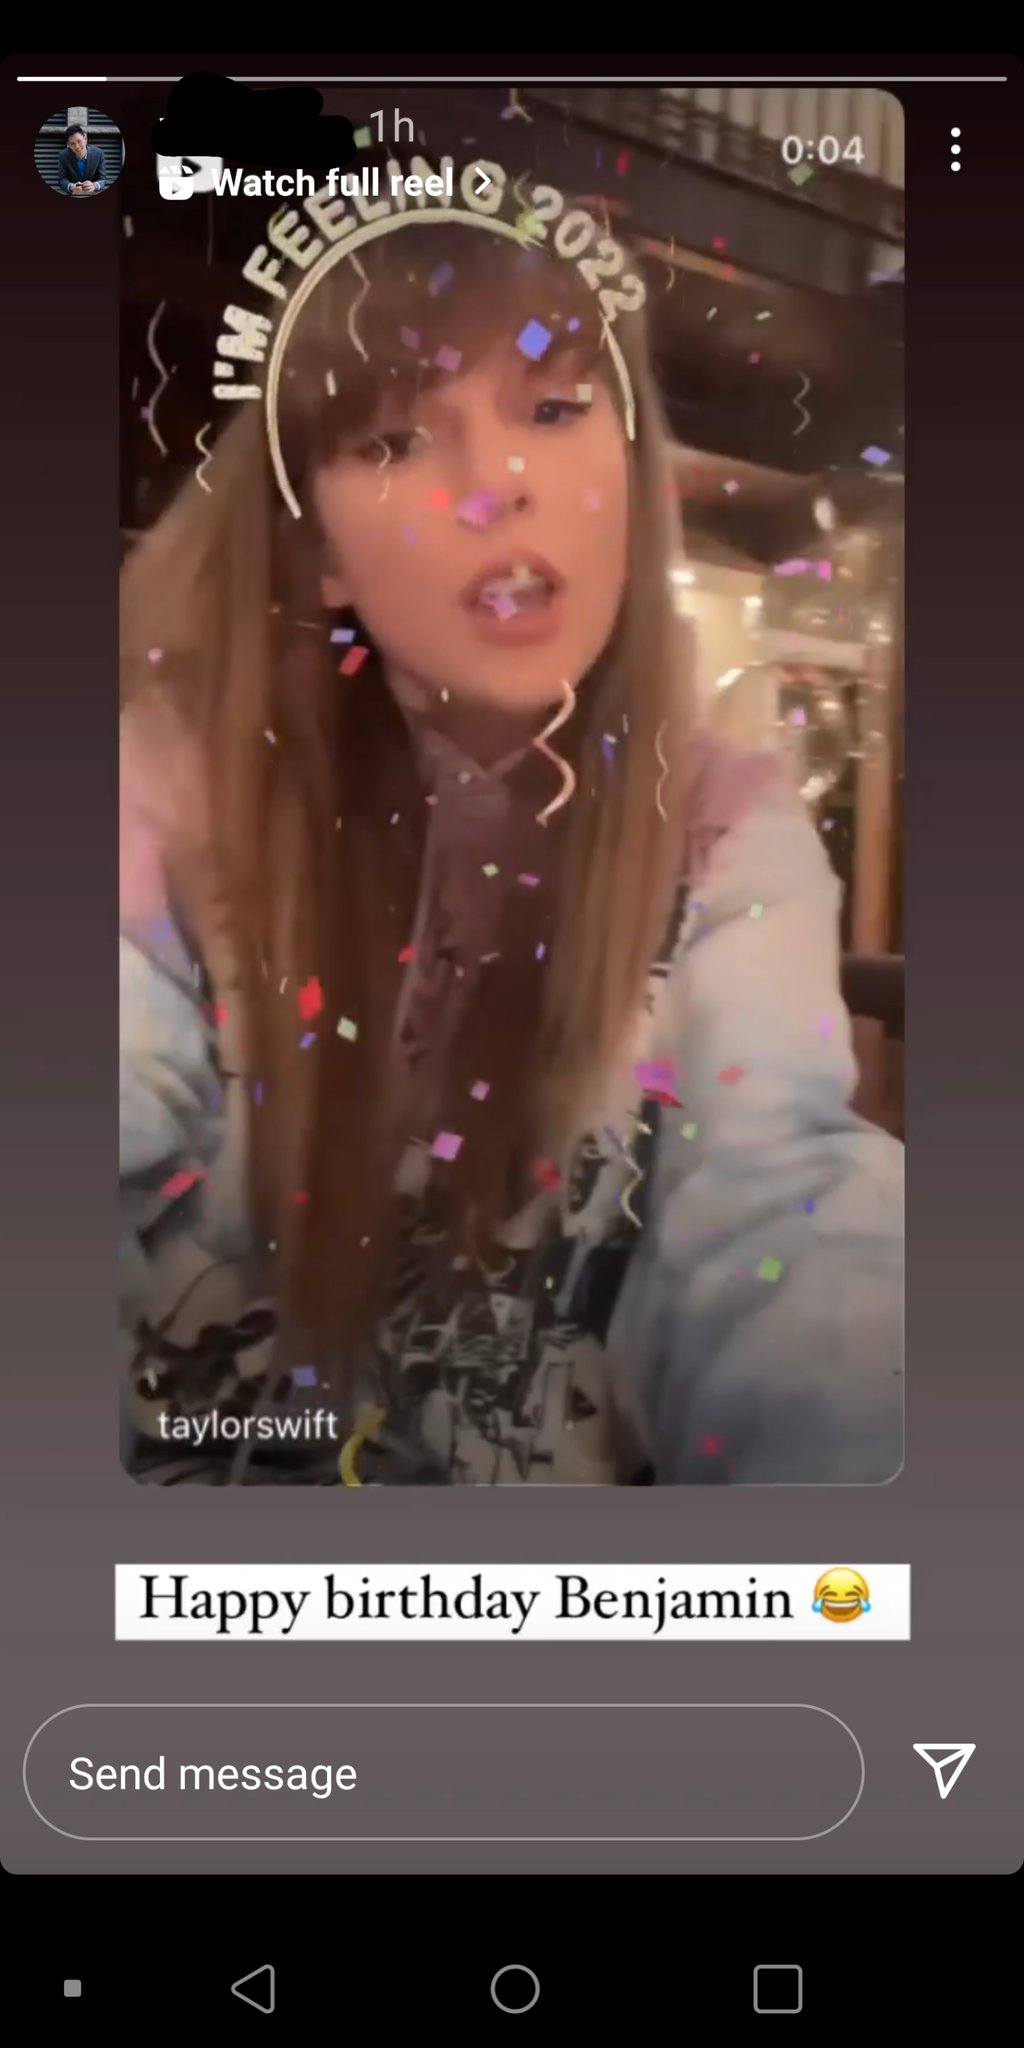 MY BAND DIRECTOR?? WISHING TAYLOR SWIFT\S CAT A HAPPY BIRTHDAY ON HIS INSTAGRAM STORY??? 